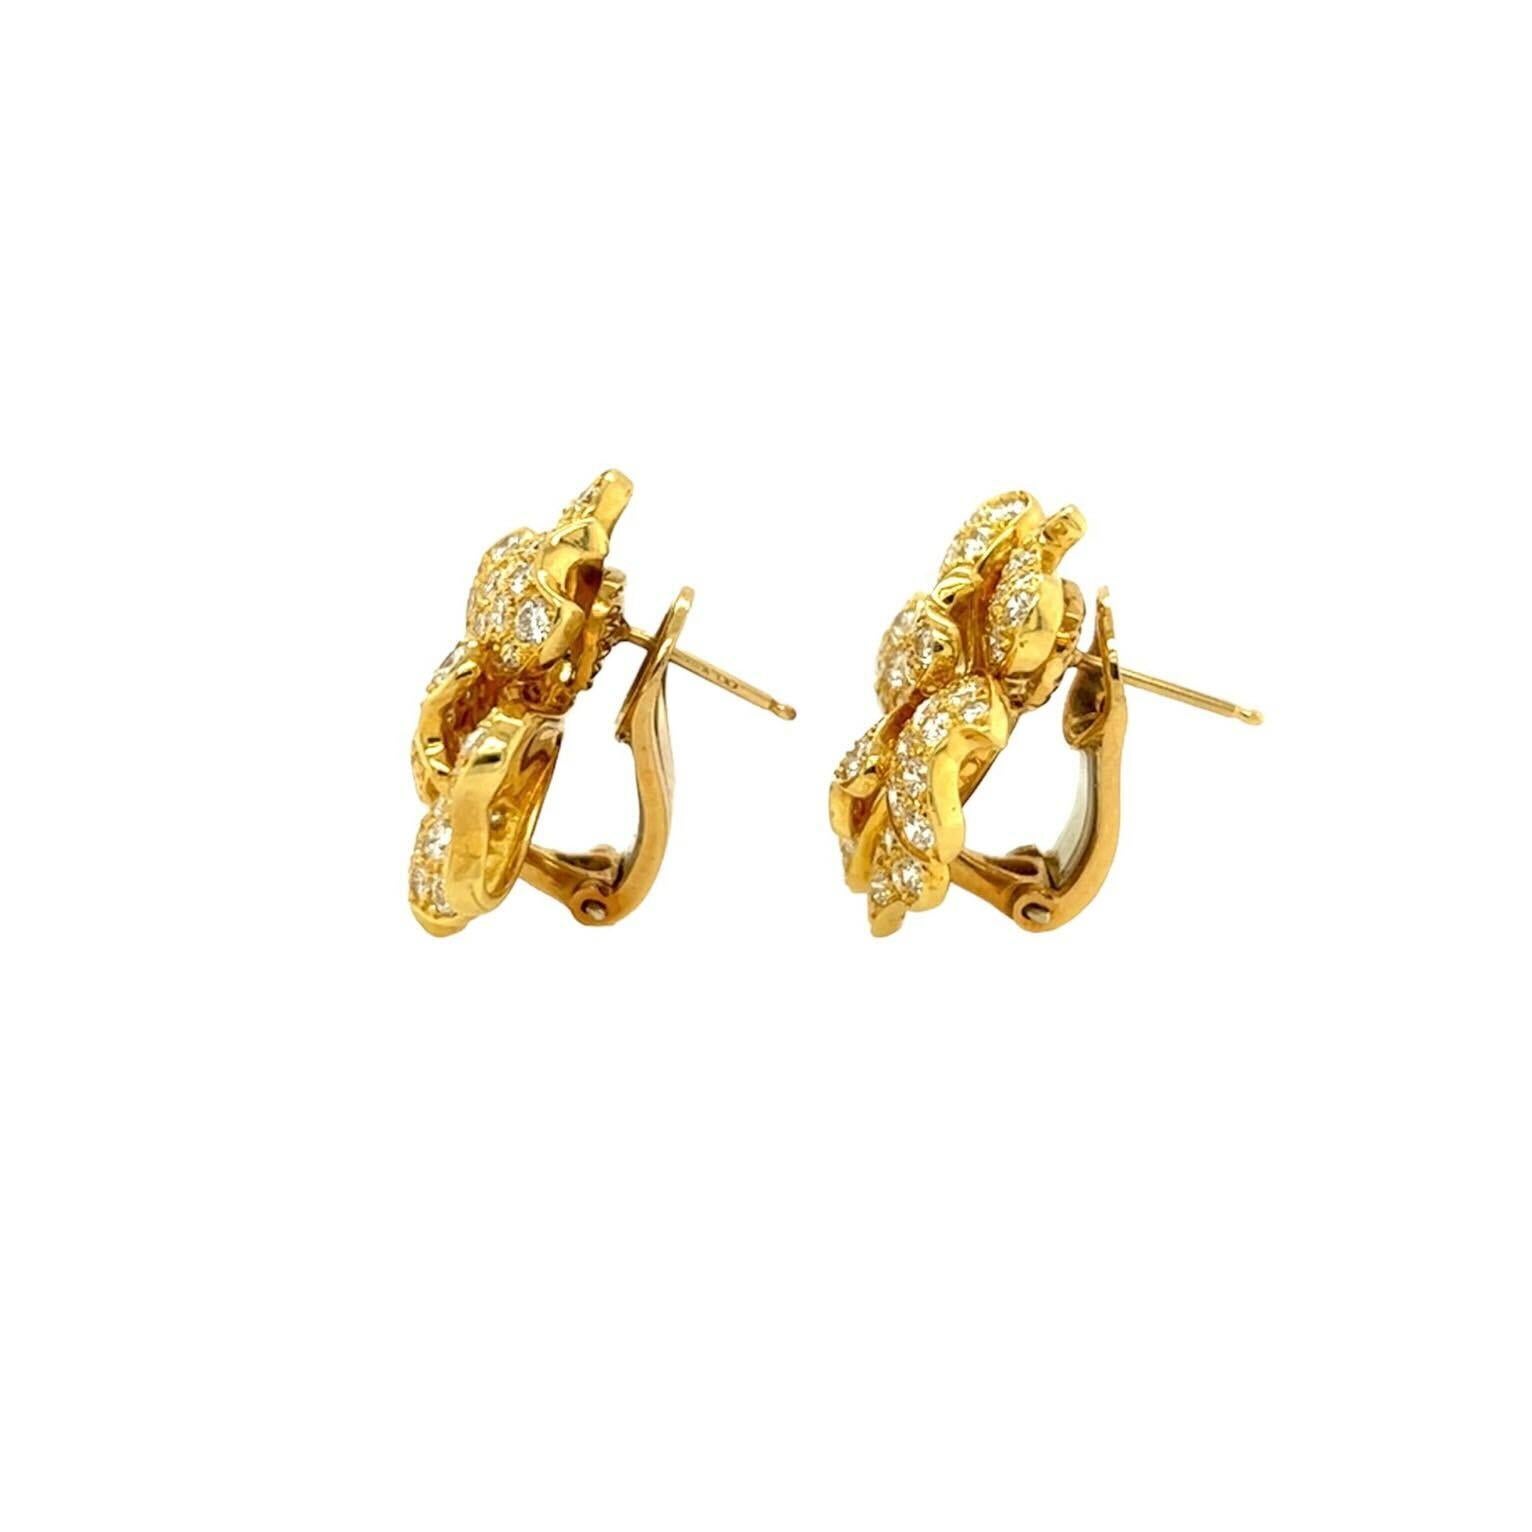 A pair of 18 karat yellow gold and diamond earrings.  Each earring designed as a flower, the petals pave set with approximately eighty seven brilliant cut diamonds.  Total diamond weight approximately 6.26 carats.  Length approximately 1 inch. 